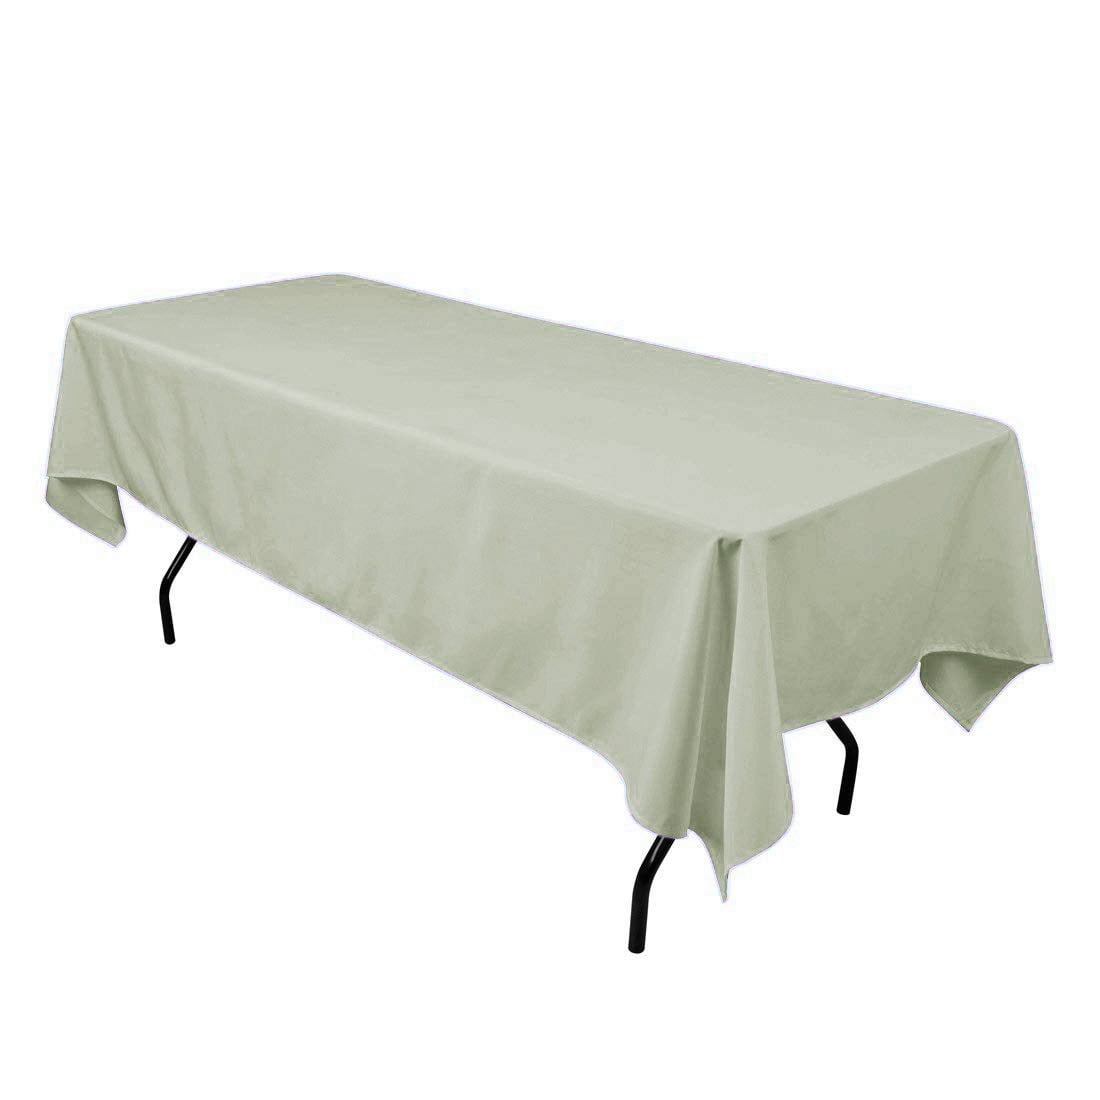 CUSSIOU Table Cloth Rectangle Table, Linen Table Cloth, Linen Tablecloth 60  x 84 Inches for 6-Foot Rectangle Tables, Washable Cloths for Spring